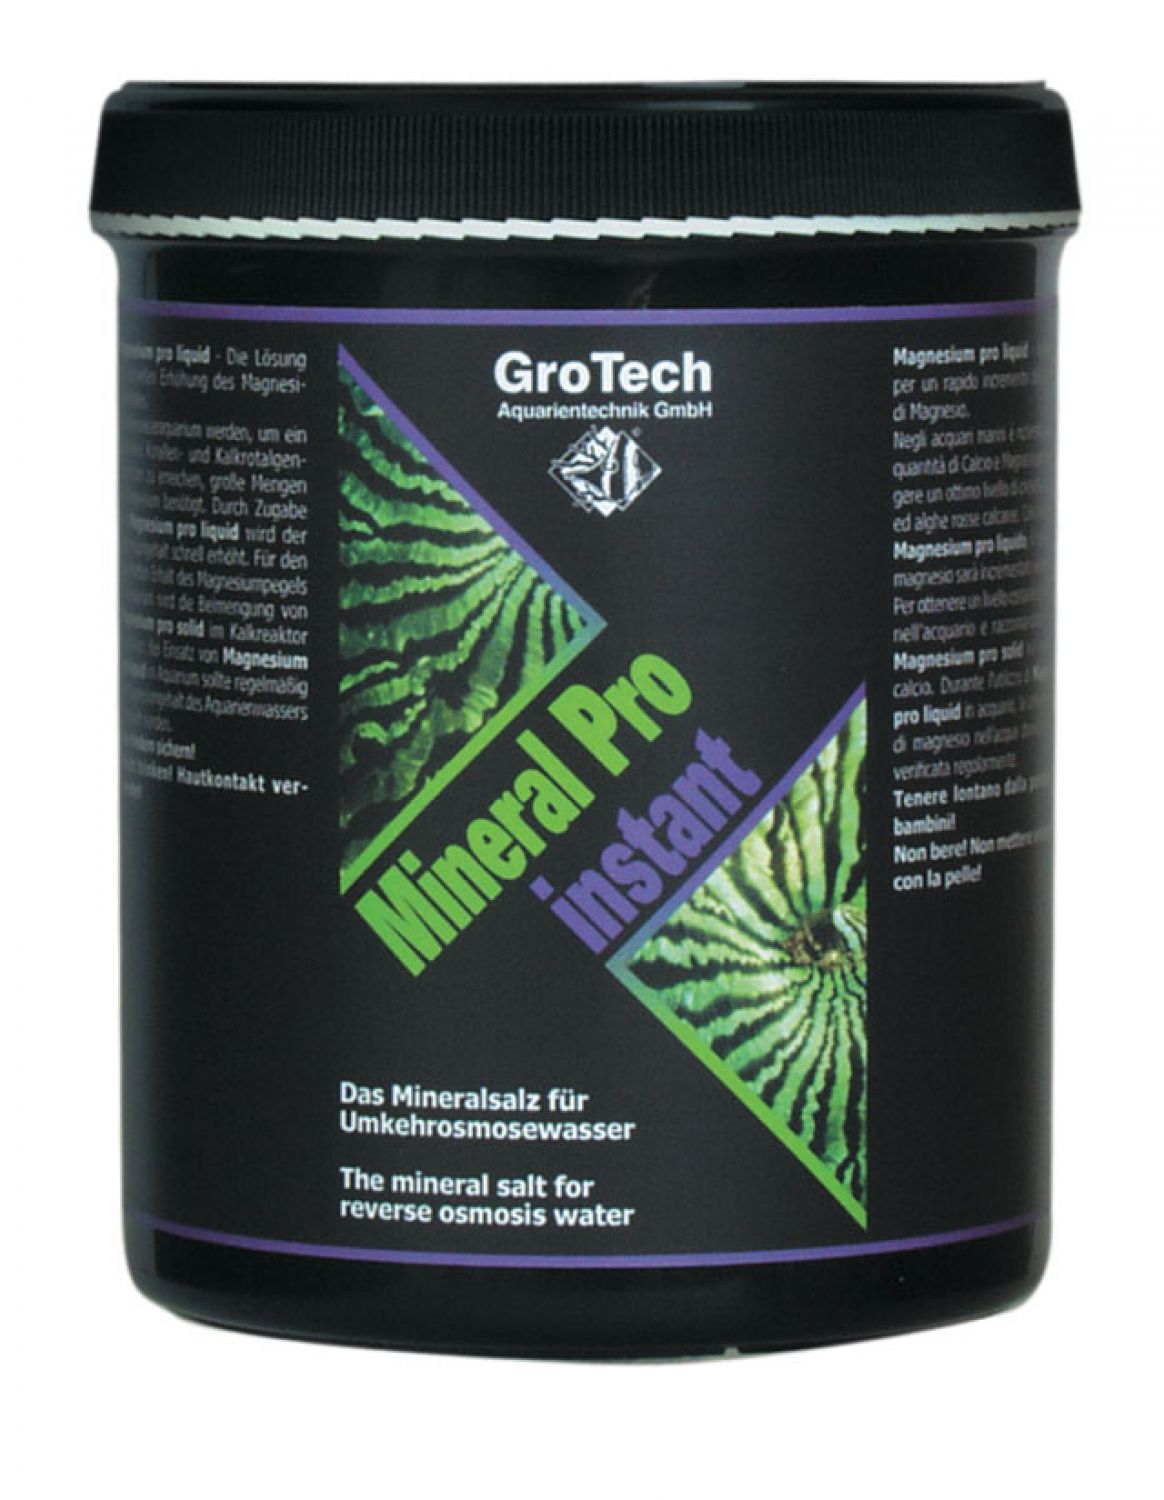 GroTech Mineral pro instant 1000 g-Dose